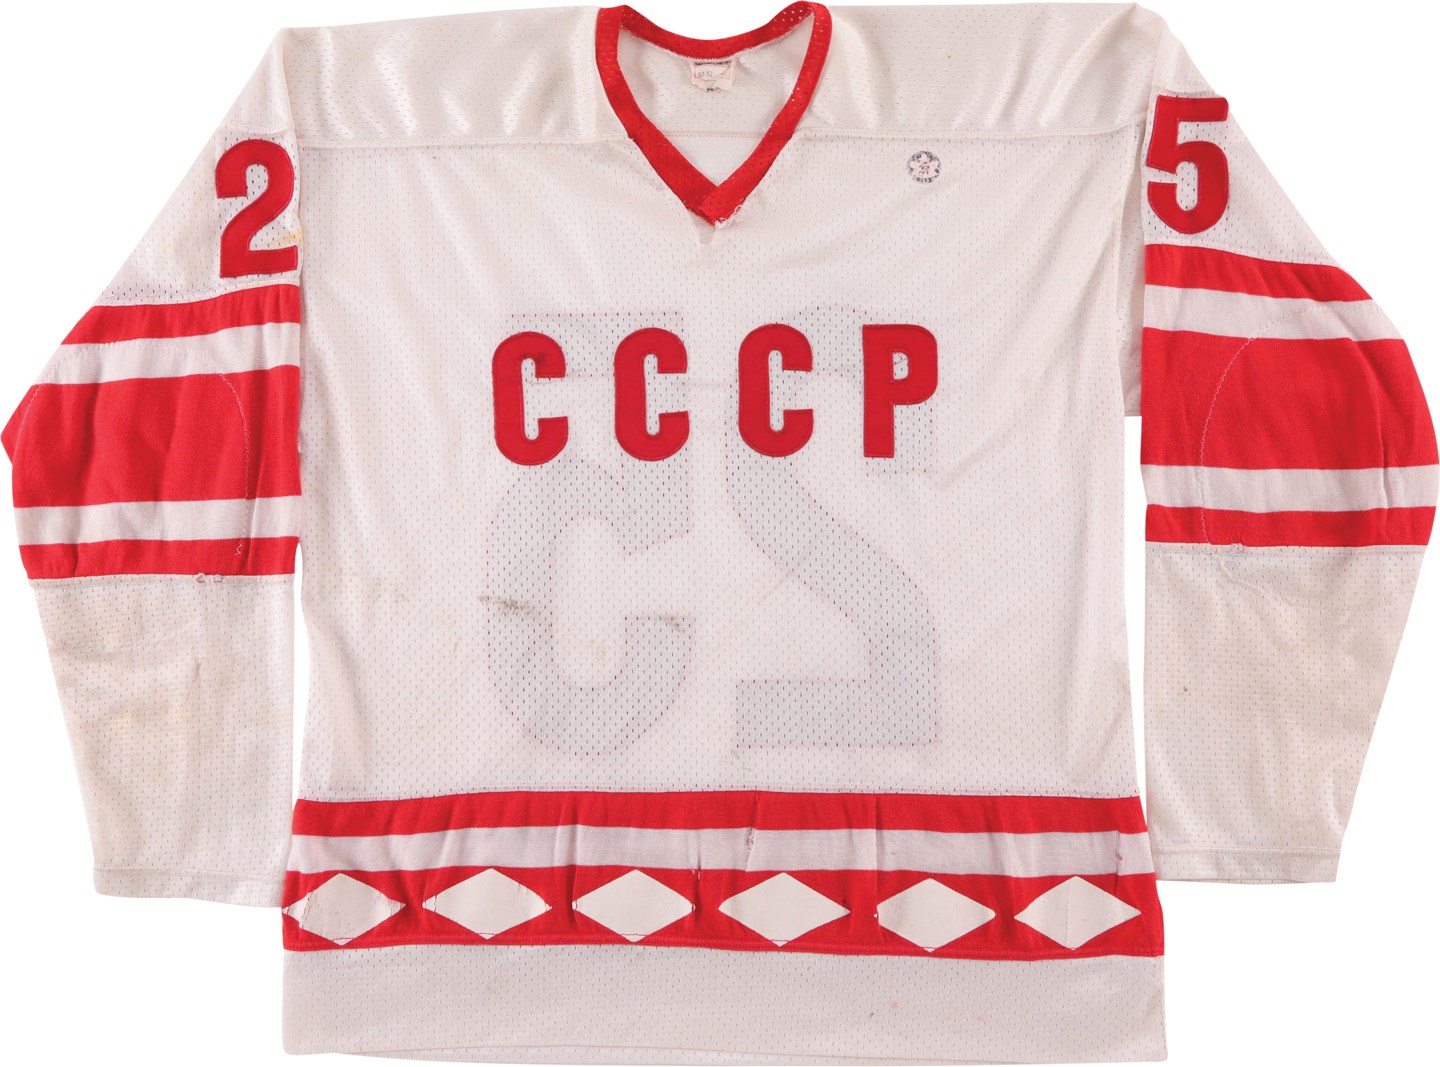 - Early 1980s Russian National "CCCP" Game Worn Jersey